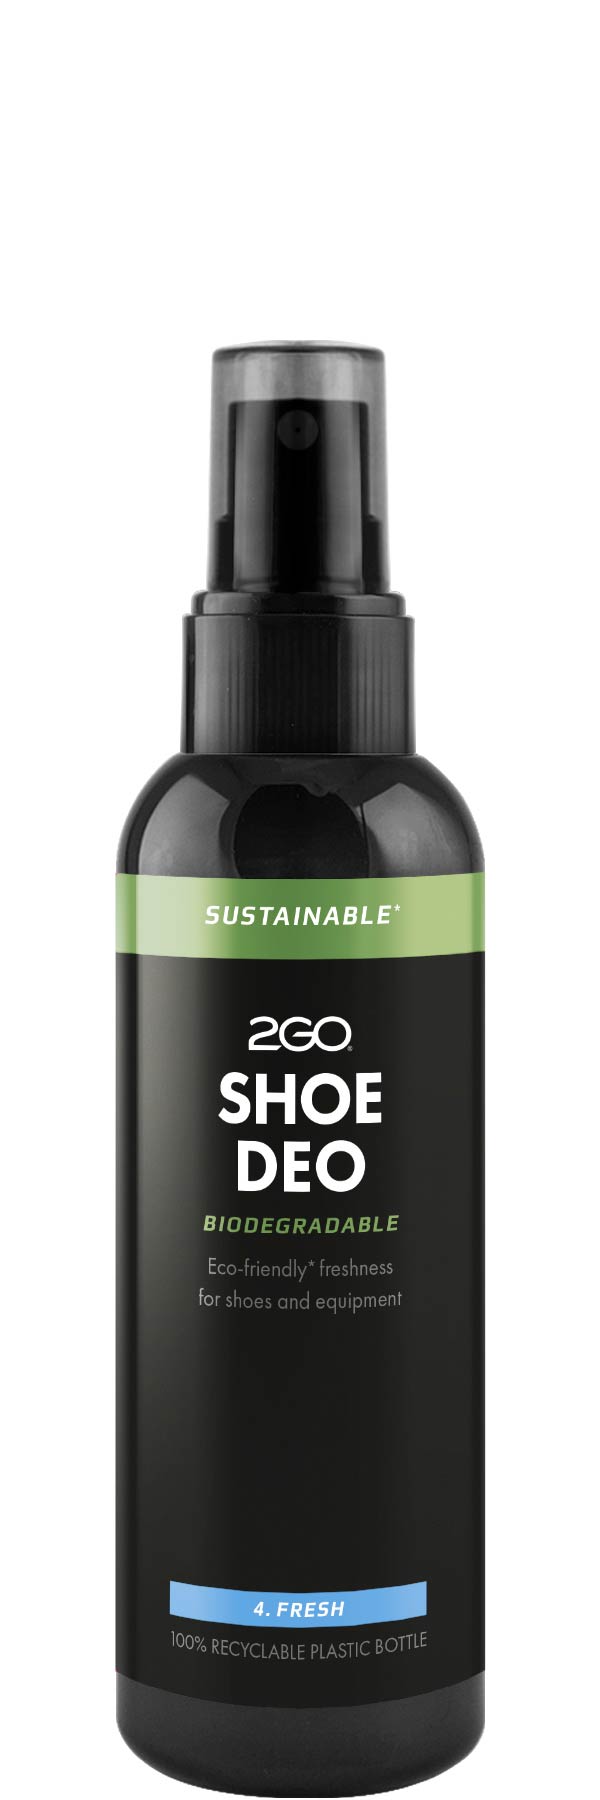 2GO - Sustainable Shoe Deo